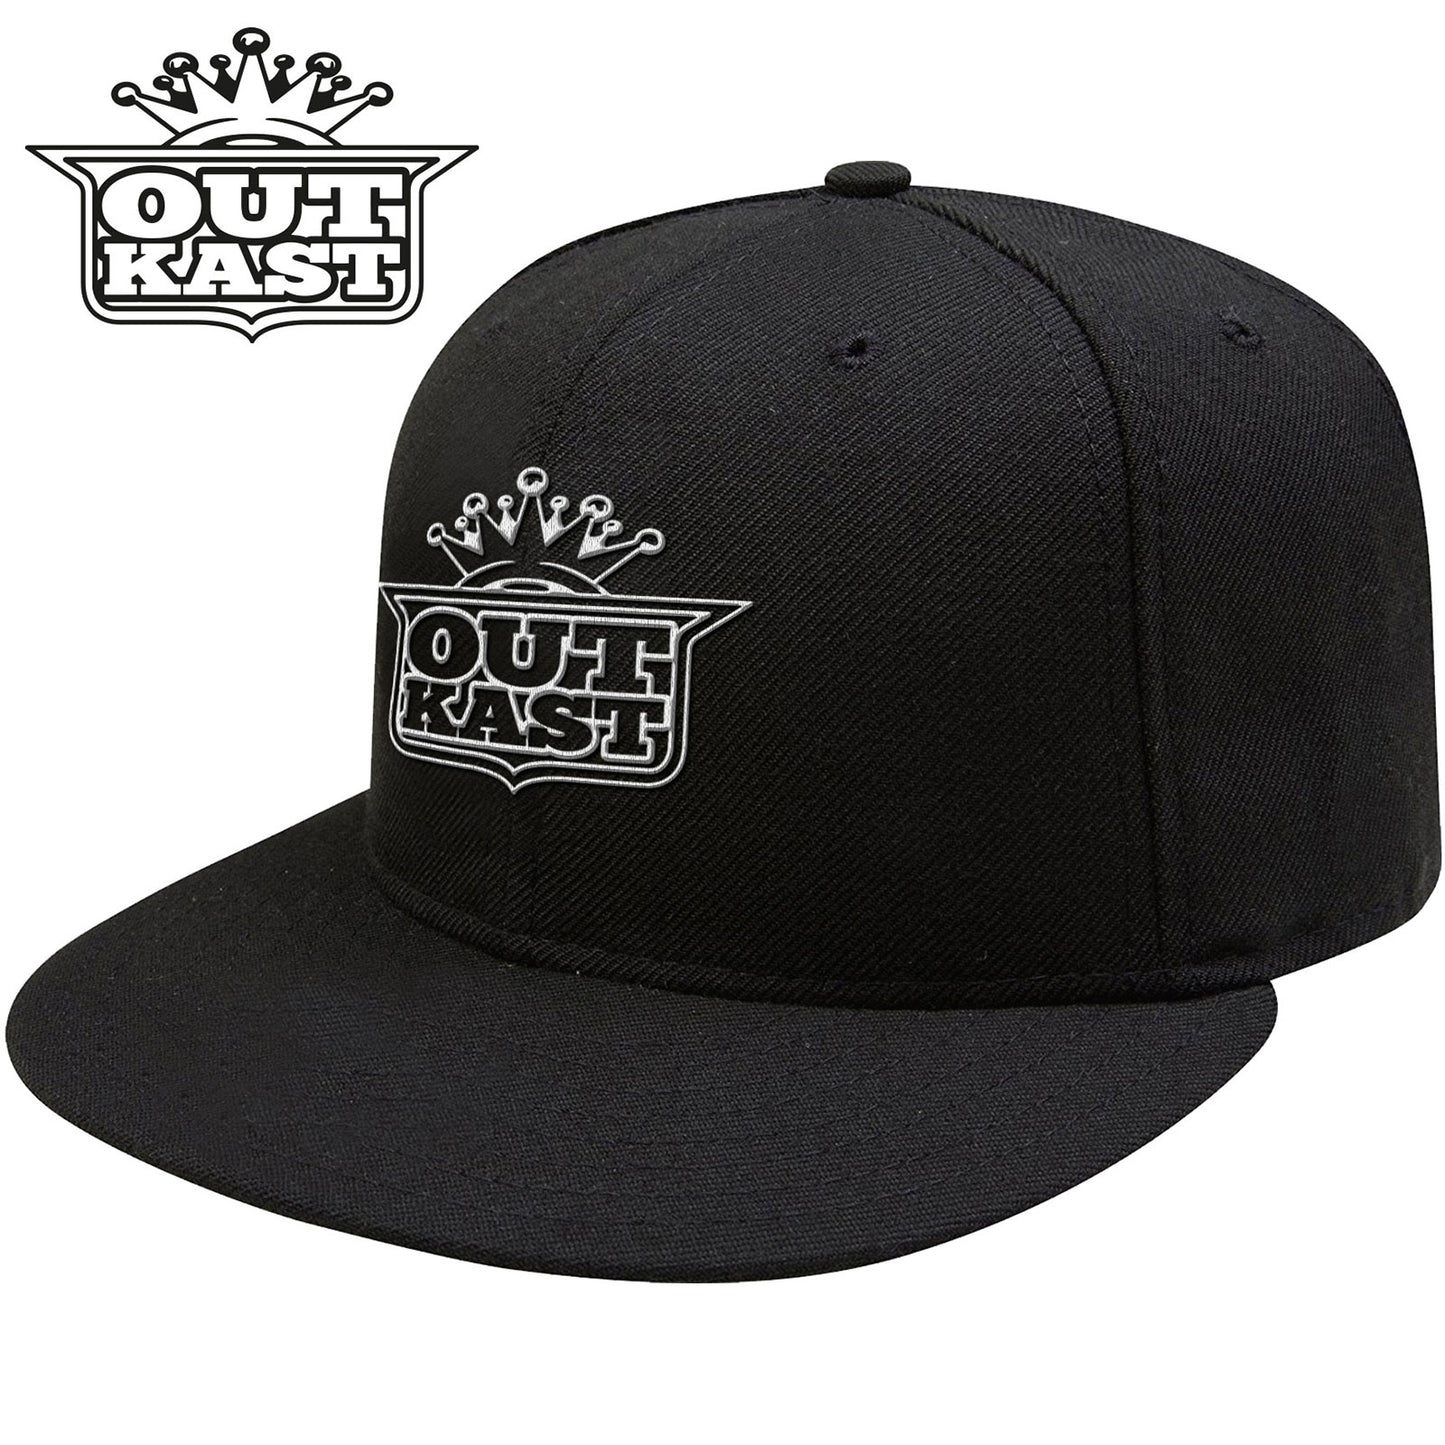 Outkast Unisex Snapback Cap: White Imperial Crown